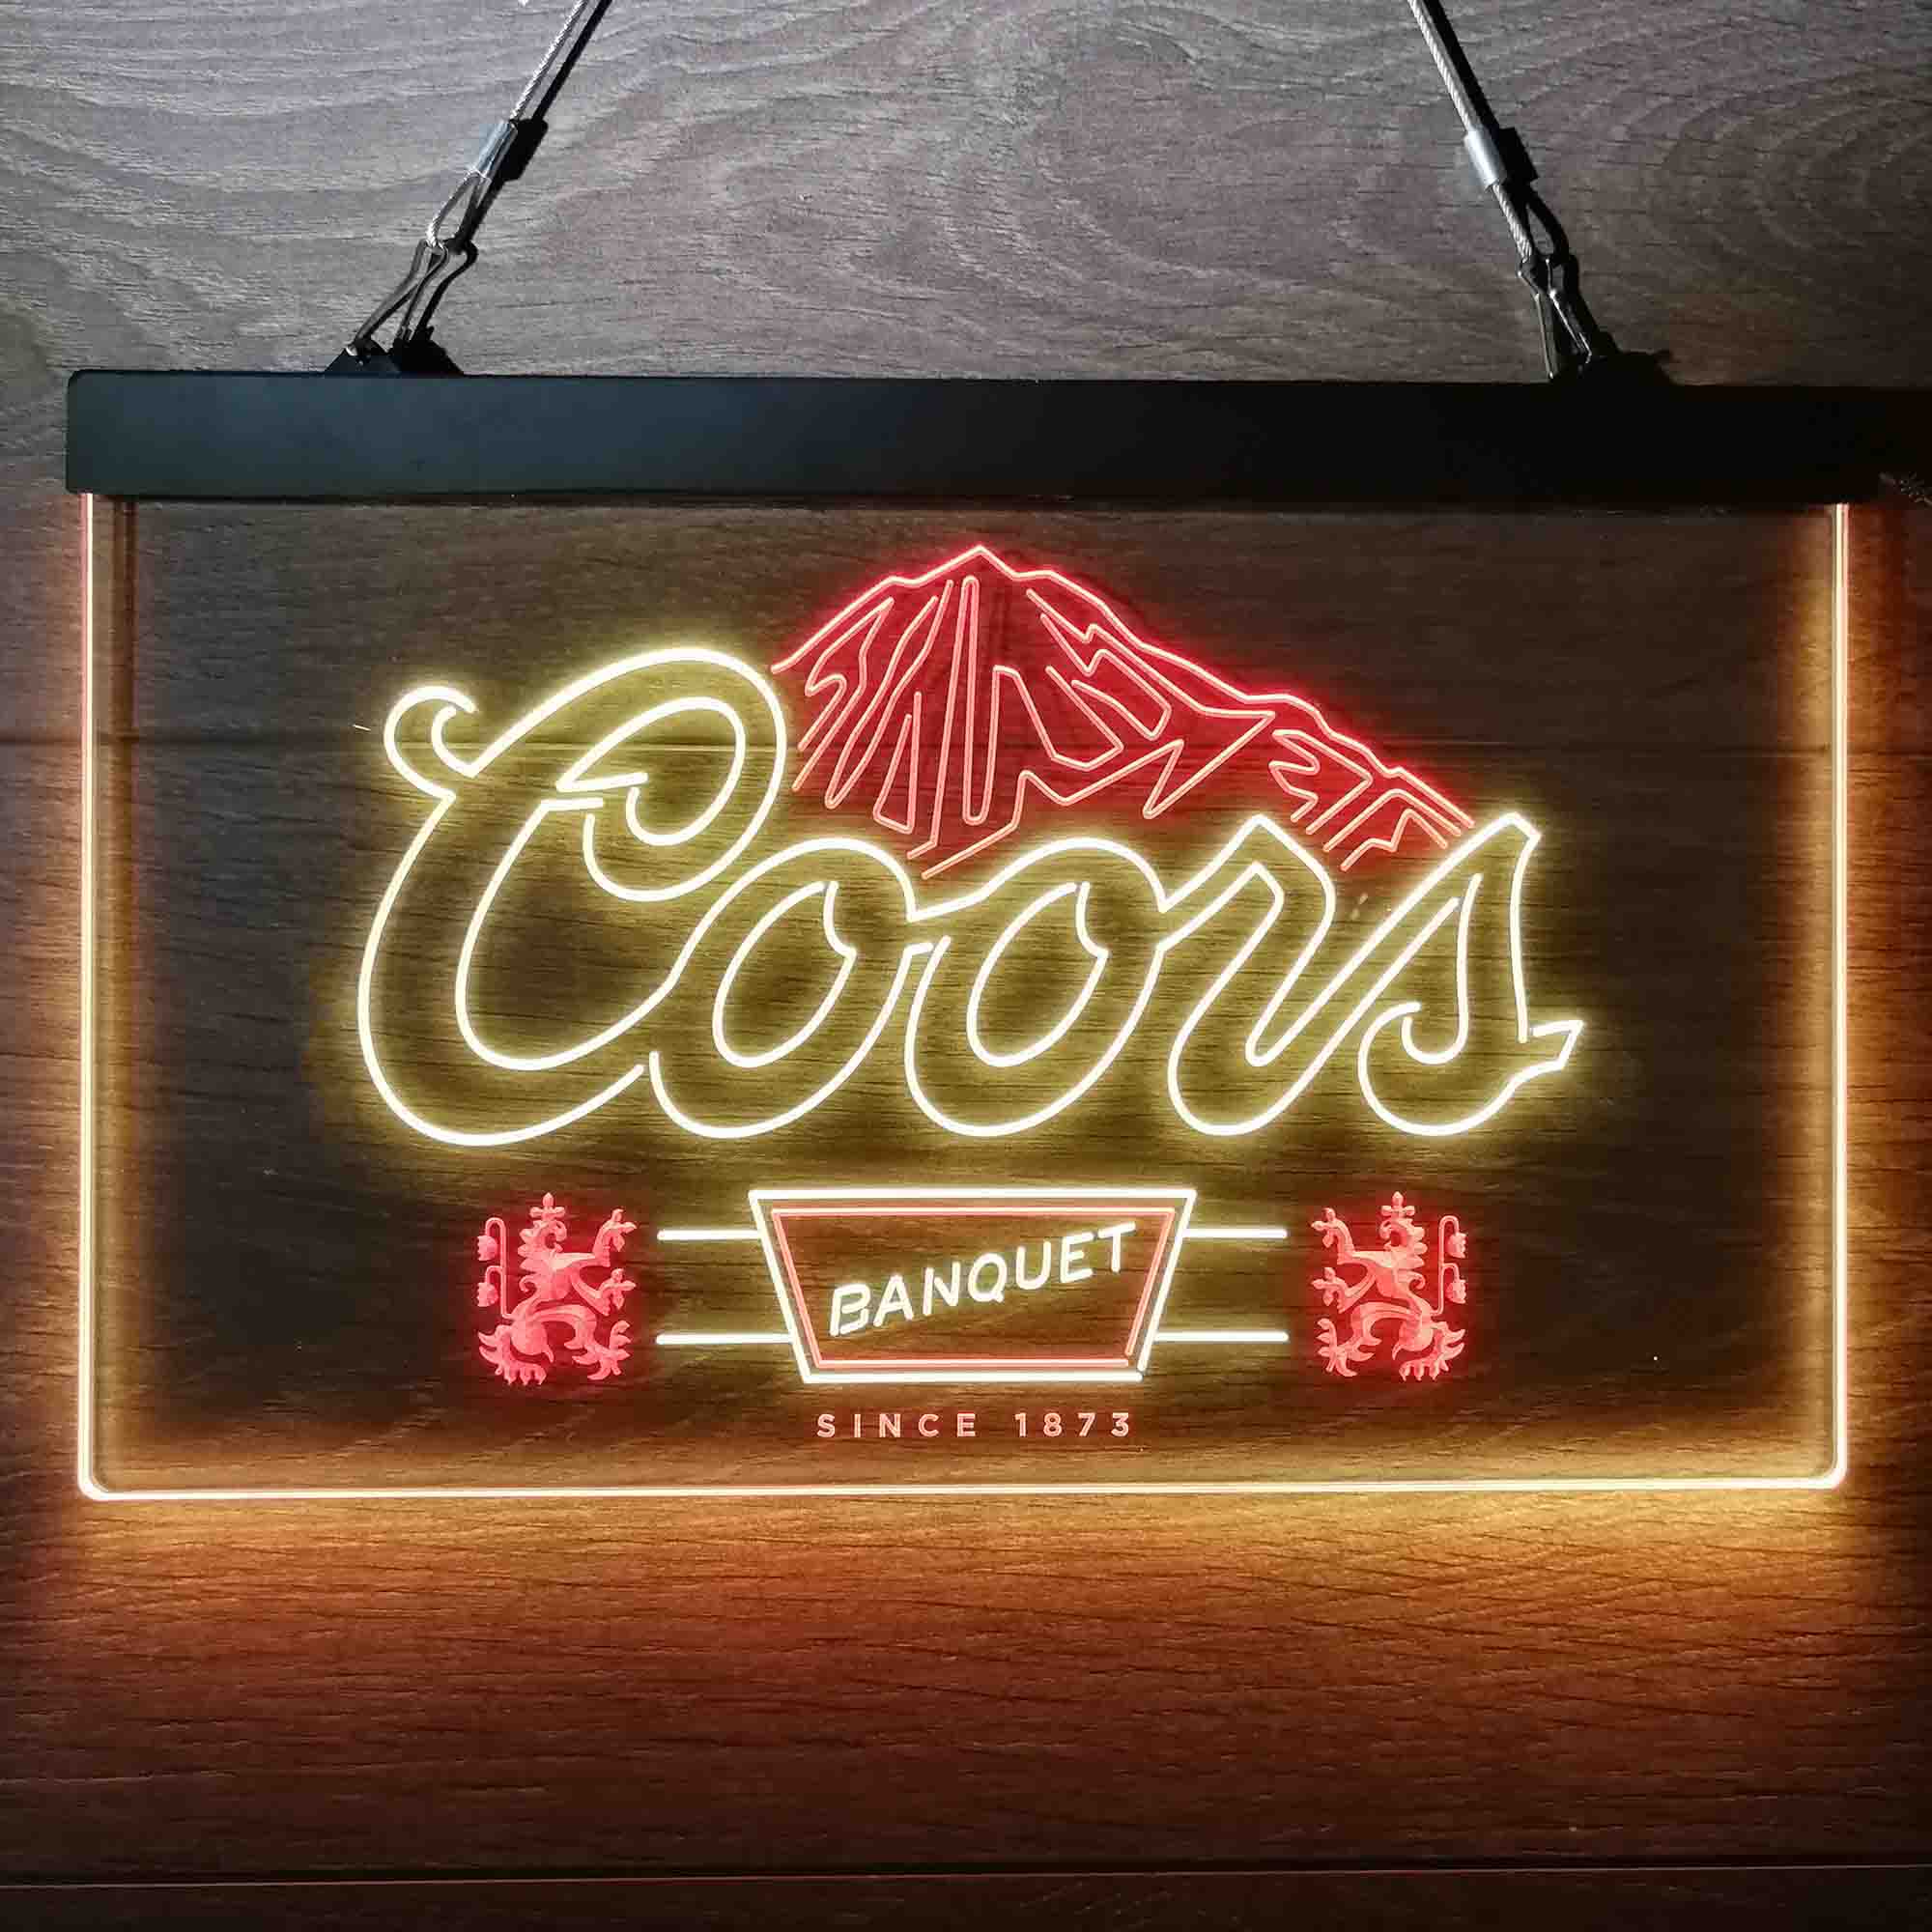 Coors Banquet Neon-Like LED Sign